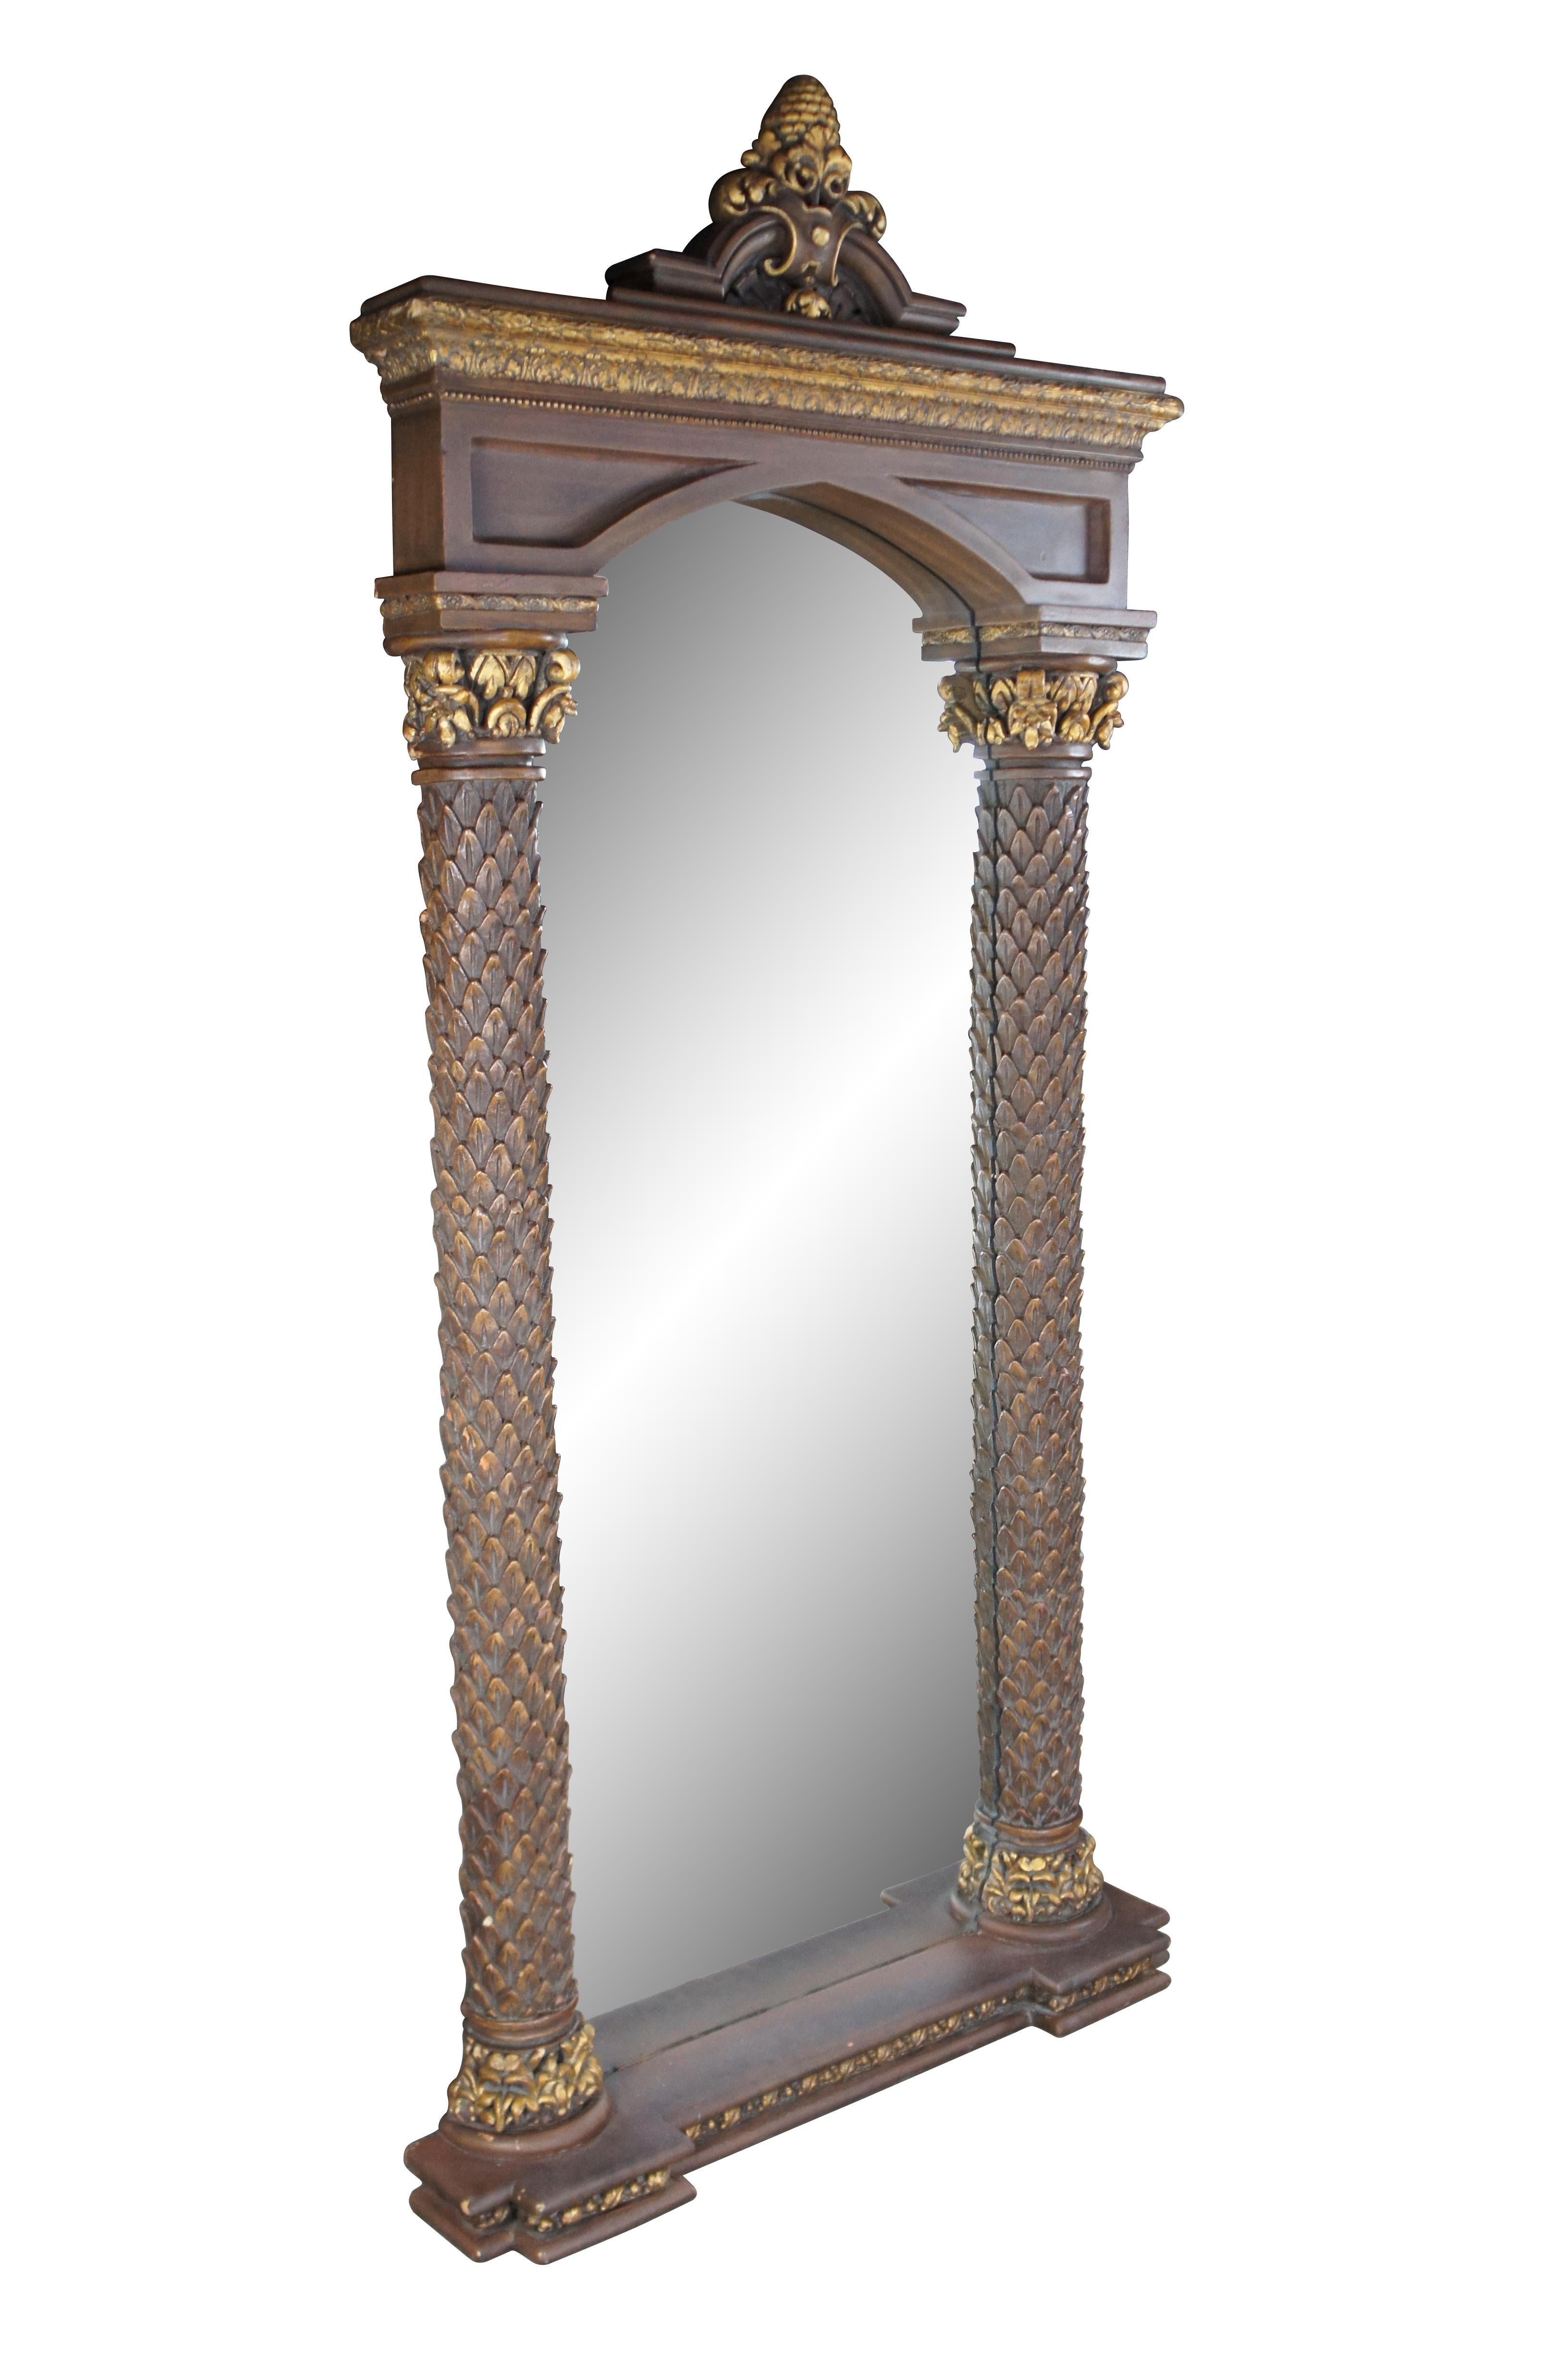 Timeless Reflections Regency style mirror, circa last quarter 20th century.  Features two ornate columns with gold acanthus accents and pineapple / fleur de list crown.  Made by Timeless Industries in Mexico

Dimensions:
37